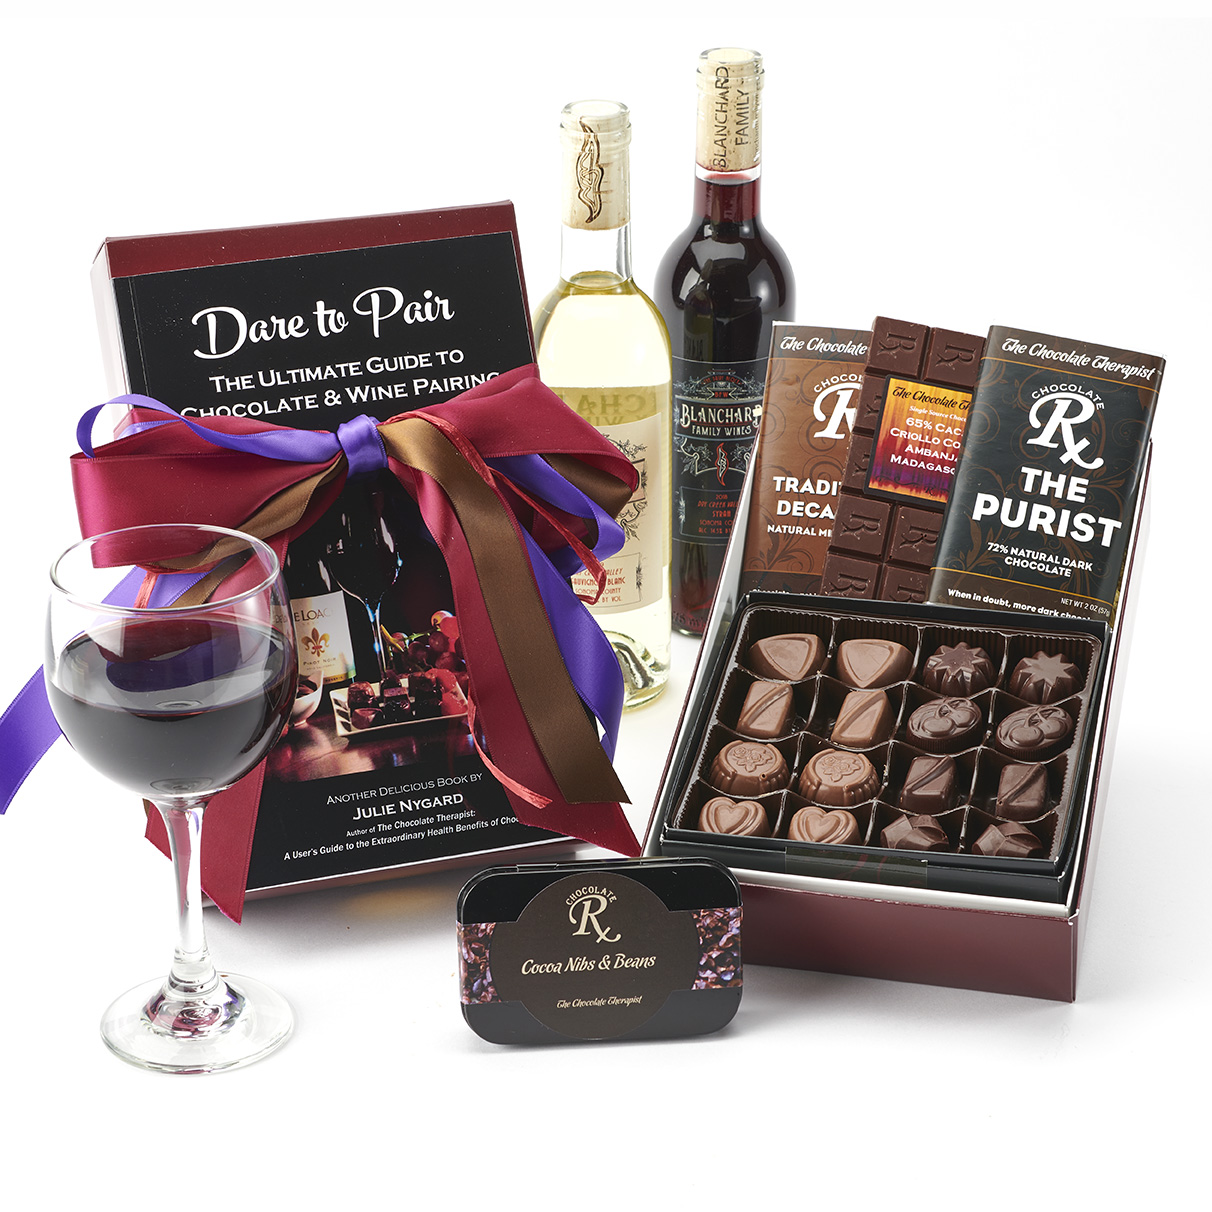 https://www.thechocolatetherapist.com/wp-content/uploads/2021/12/Chocolate-and-Wine-Pairing-Kit-with-Wine-by-The-Chocolate-Therapist.jpg